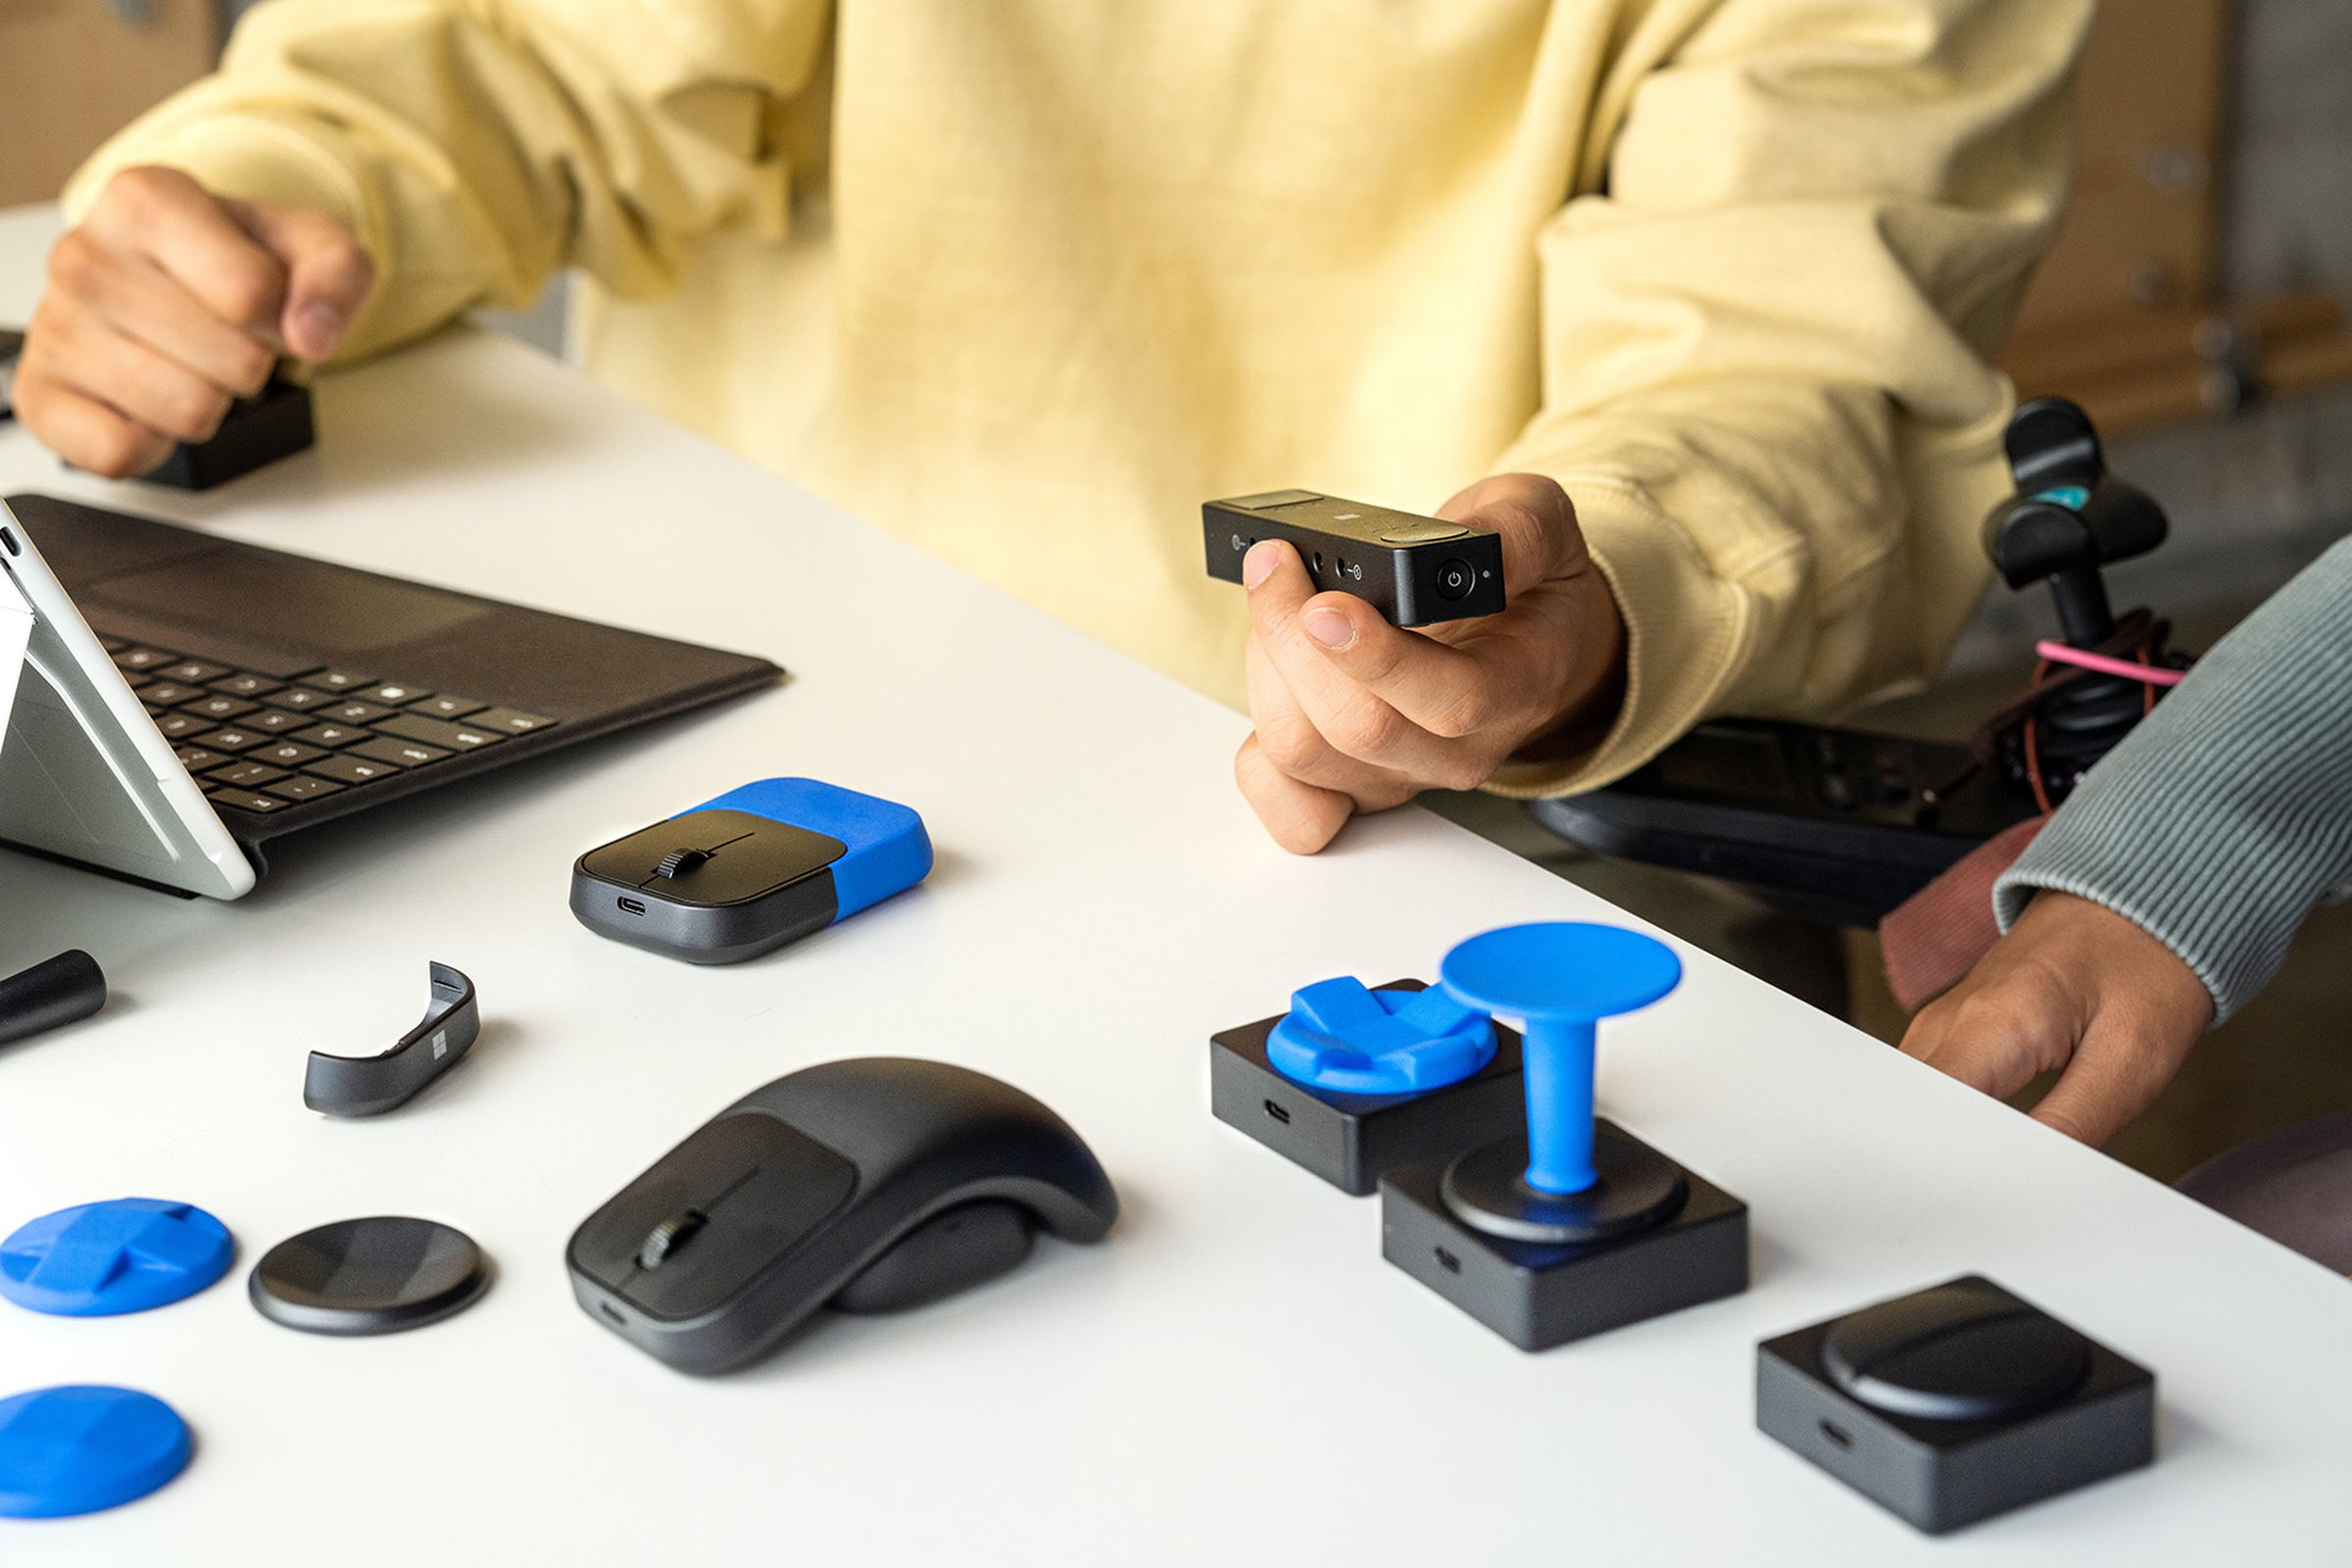 A selection of Microsoft Adaptive Accessories being used by two people who are sat at a desk, using a laptop.